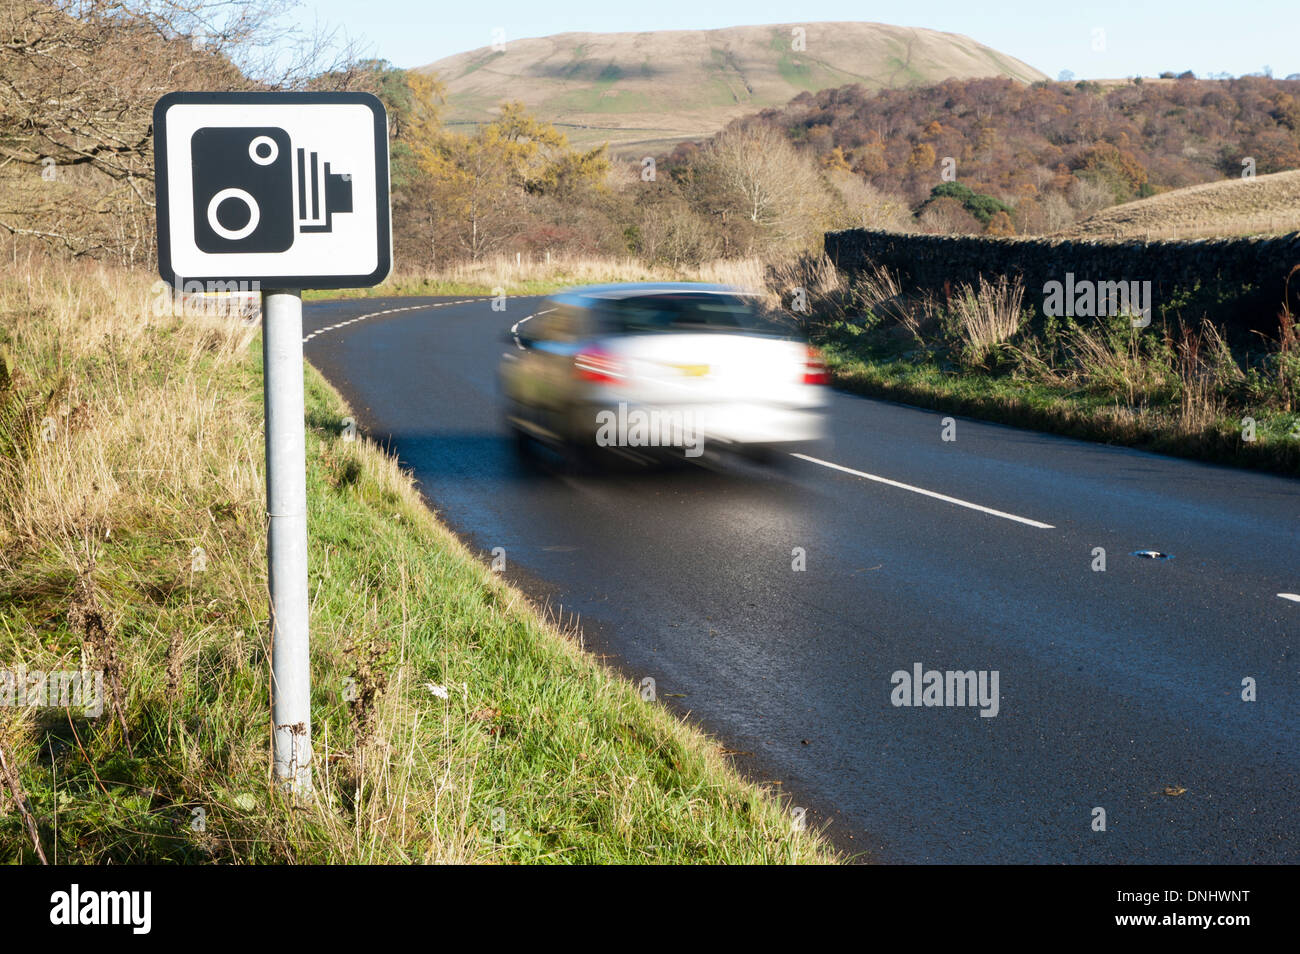 Car on rural road going past a speed camera warning sign. Cumbria, UK Stock Photo